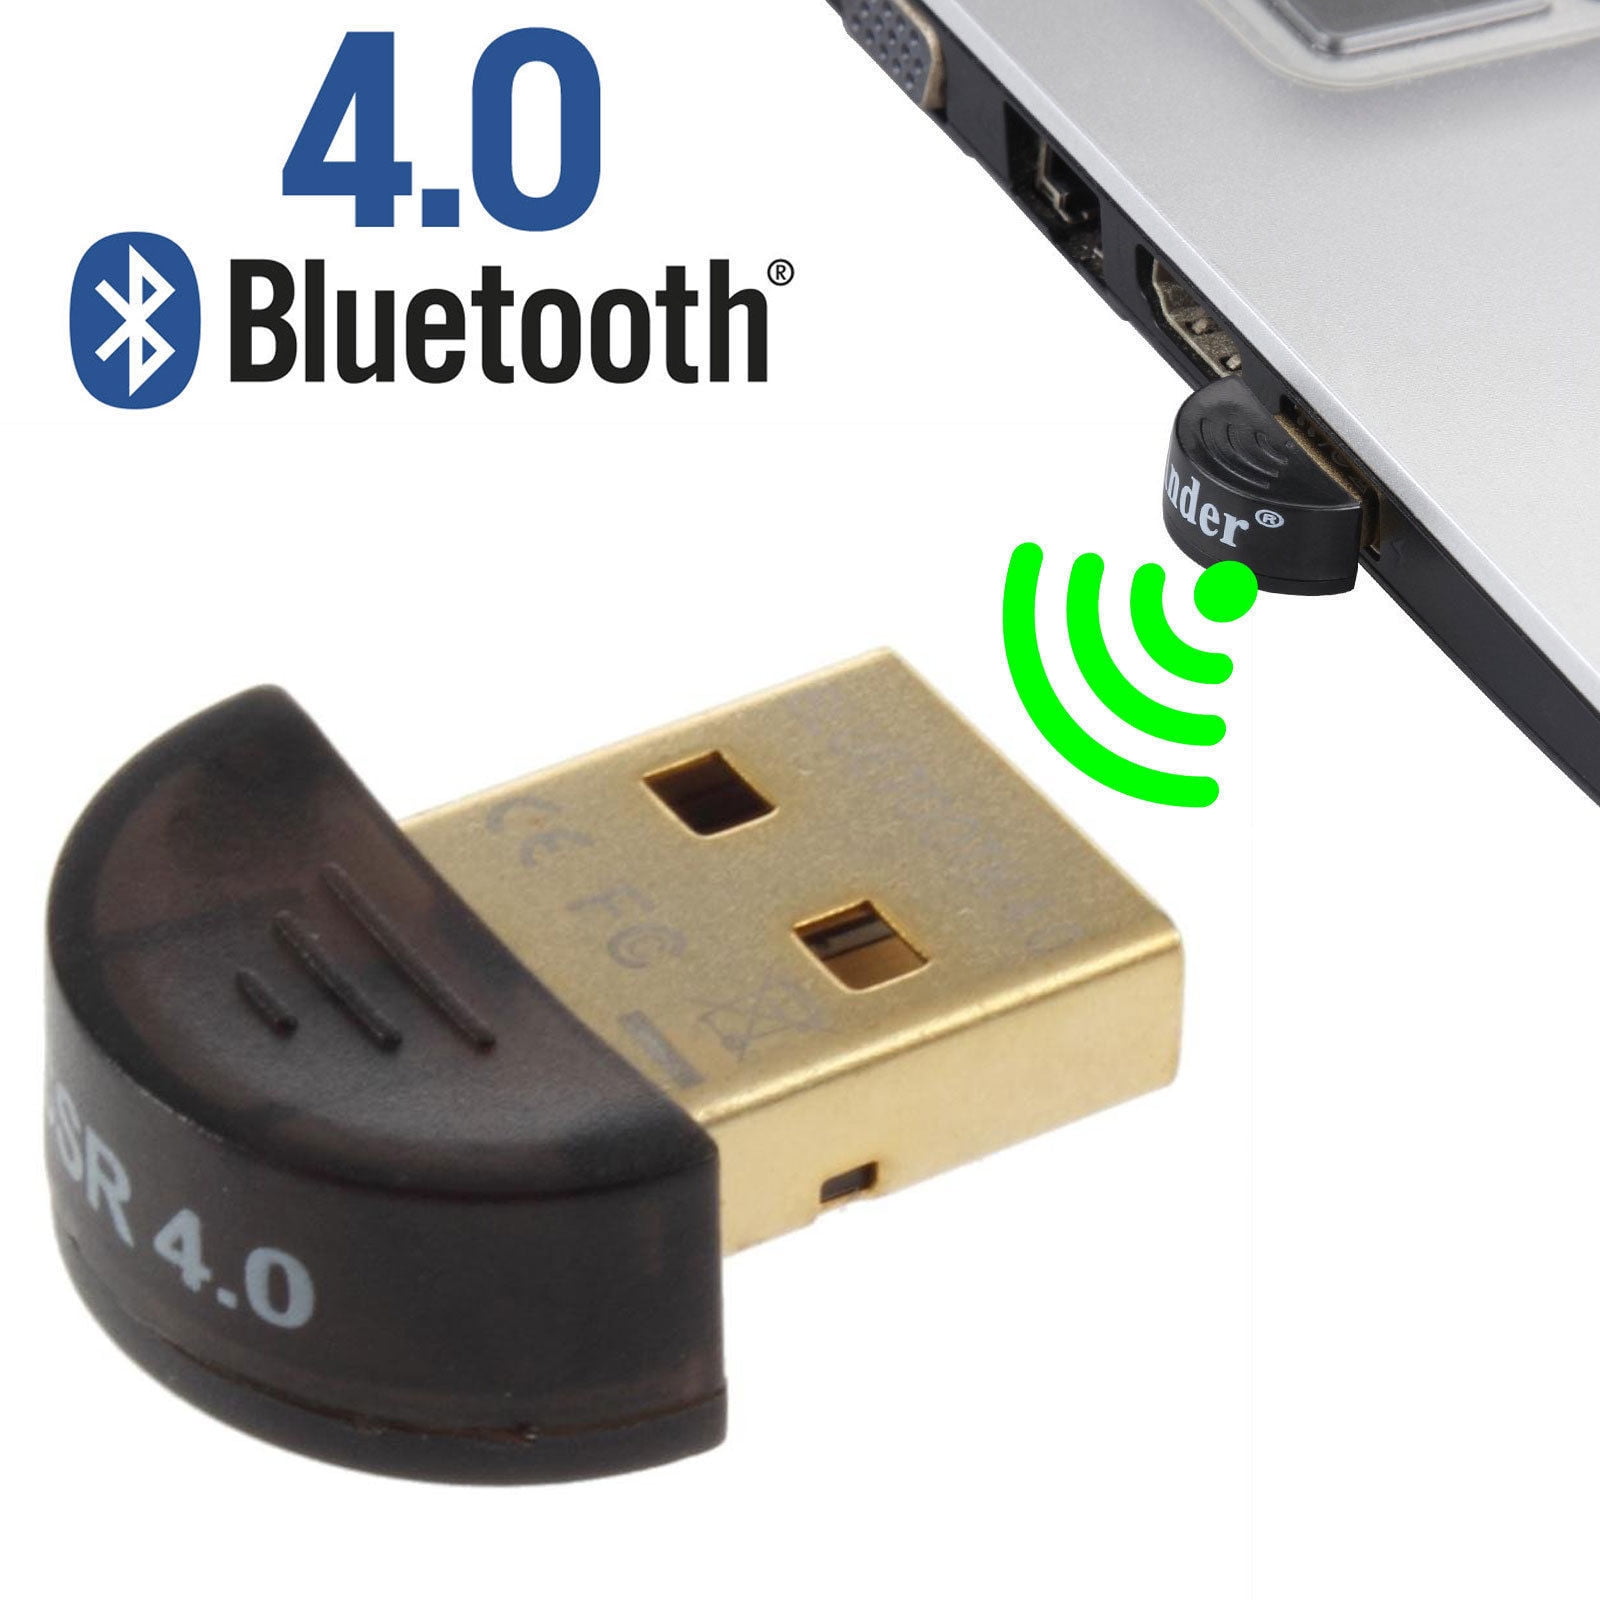 bluetooth csr 4.0 dongle driver for windows 10